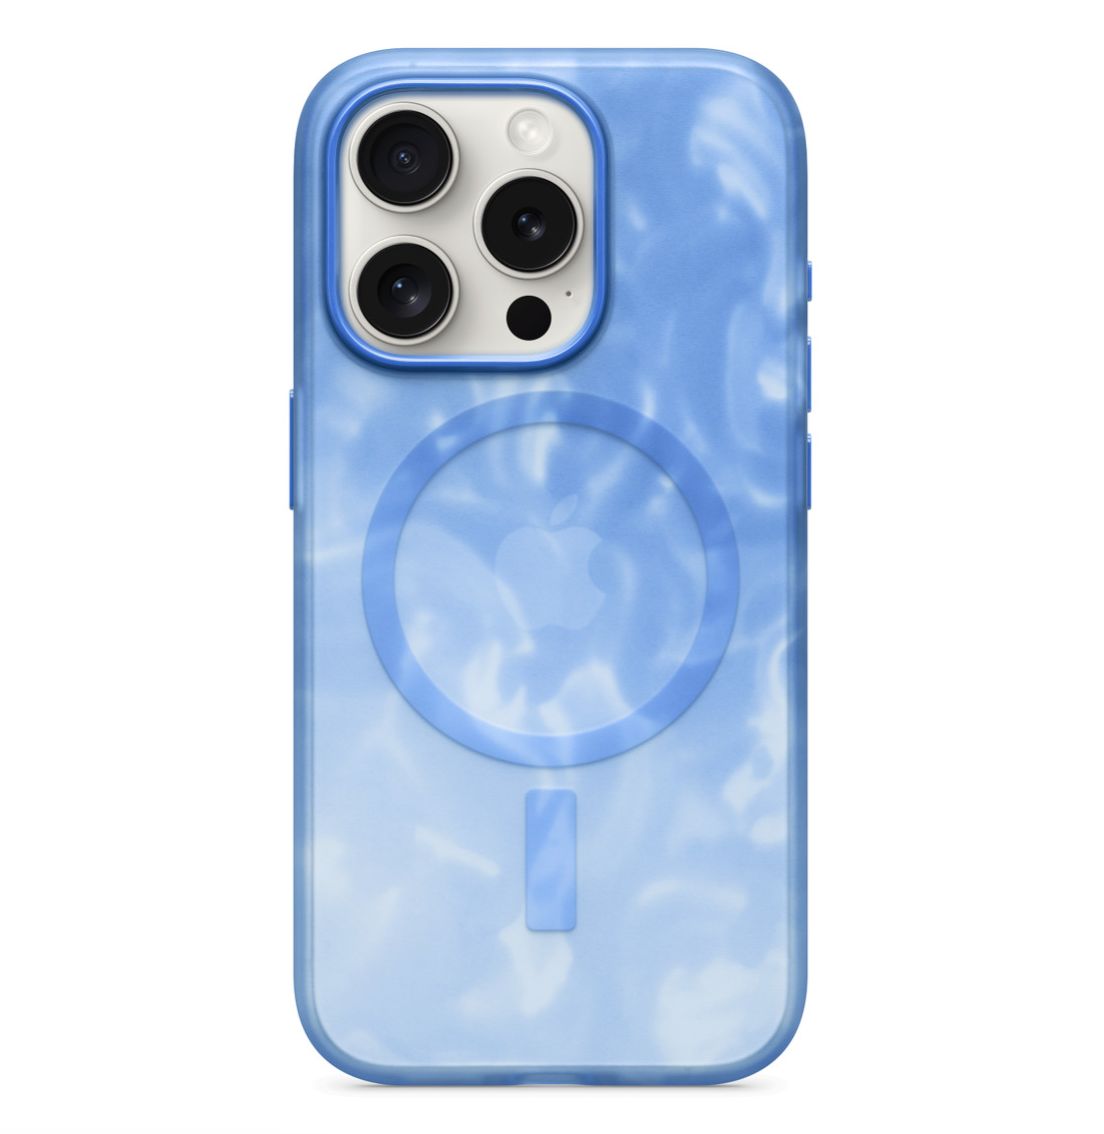 A blue OtterBox case on a phone